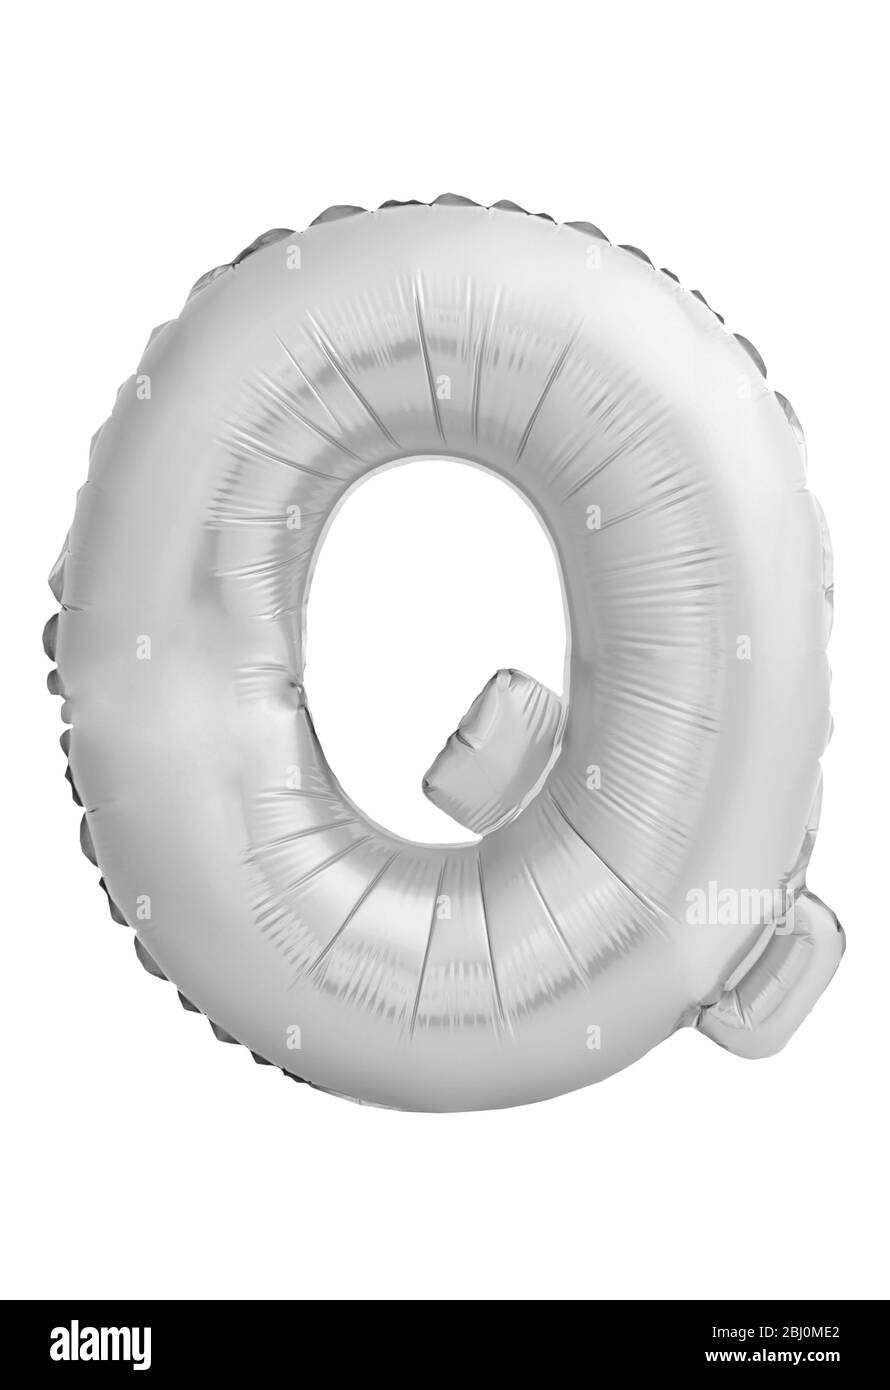 Letter Q made of inflatable balloon isolated on white Stock Photo